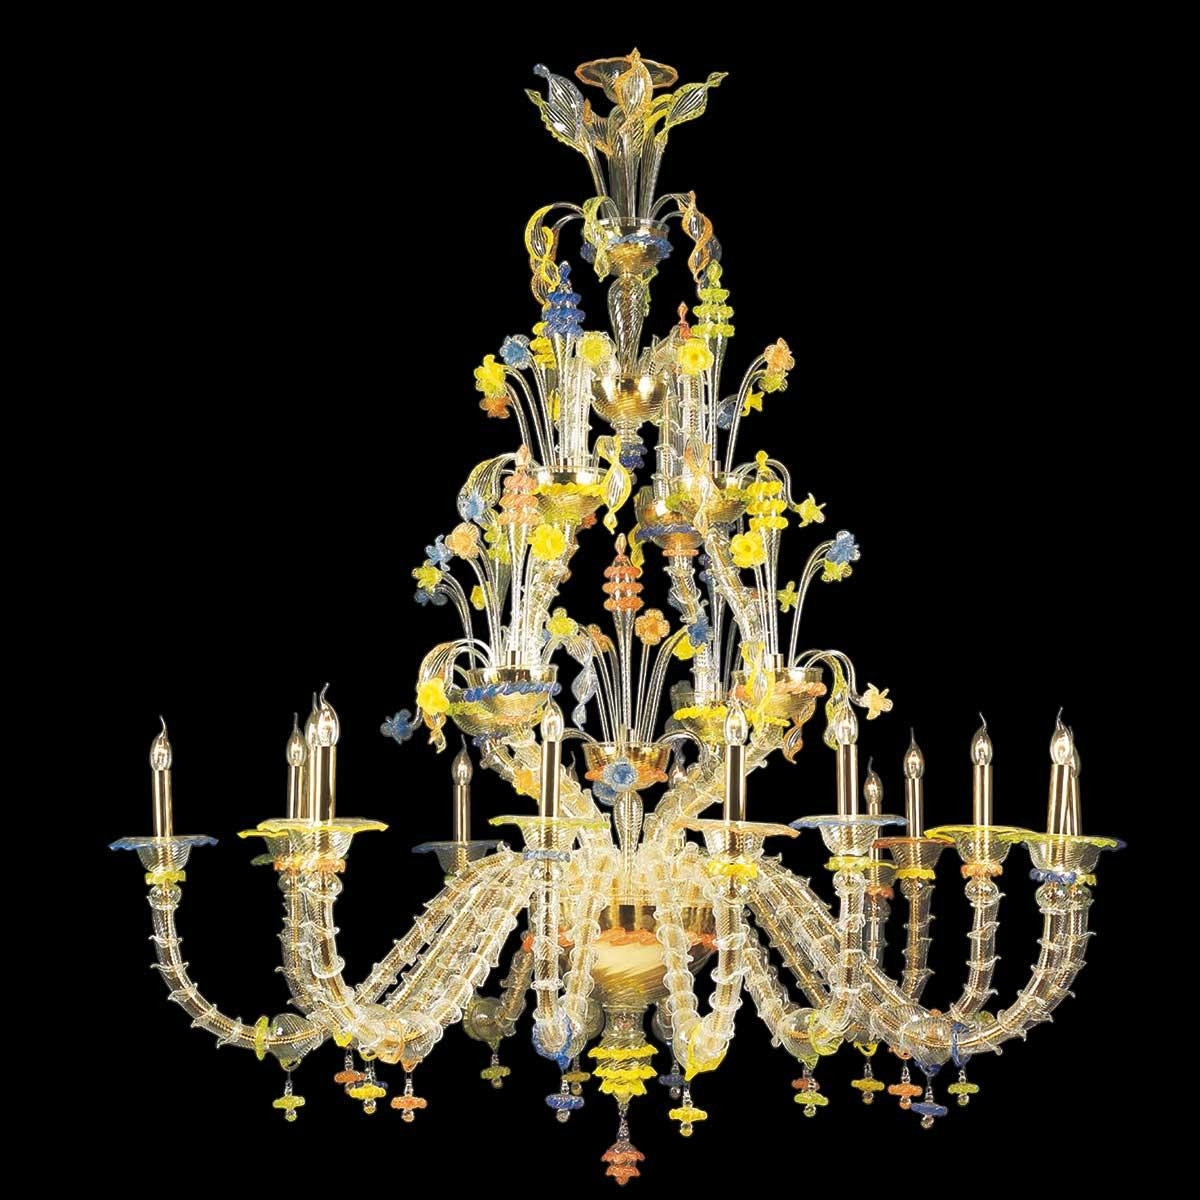 "Carlotta" Murano glass chandelier - 8+8 lights - transparent, multicolor and gold